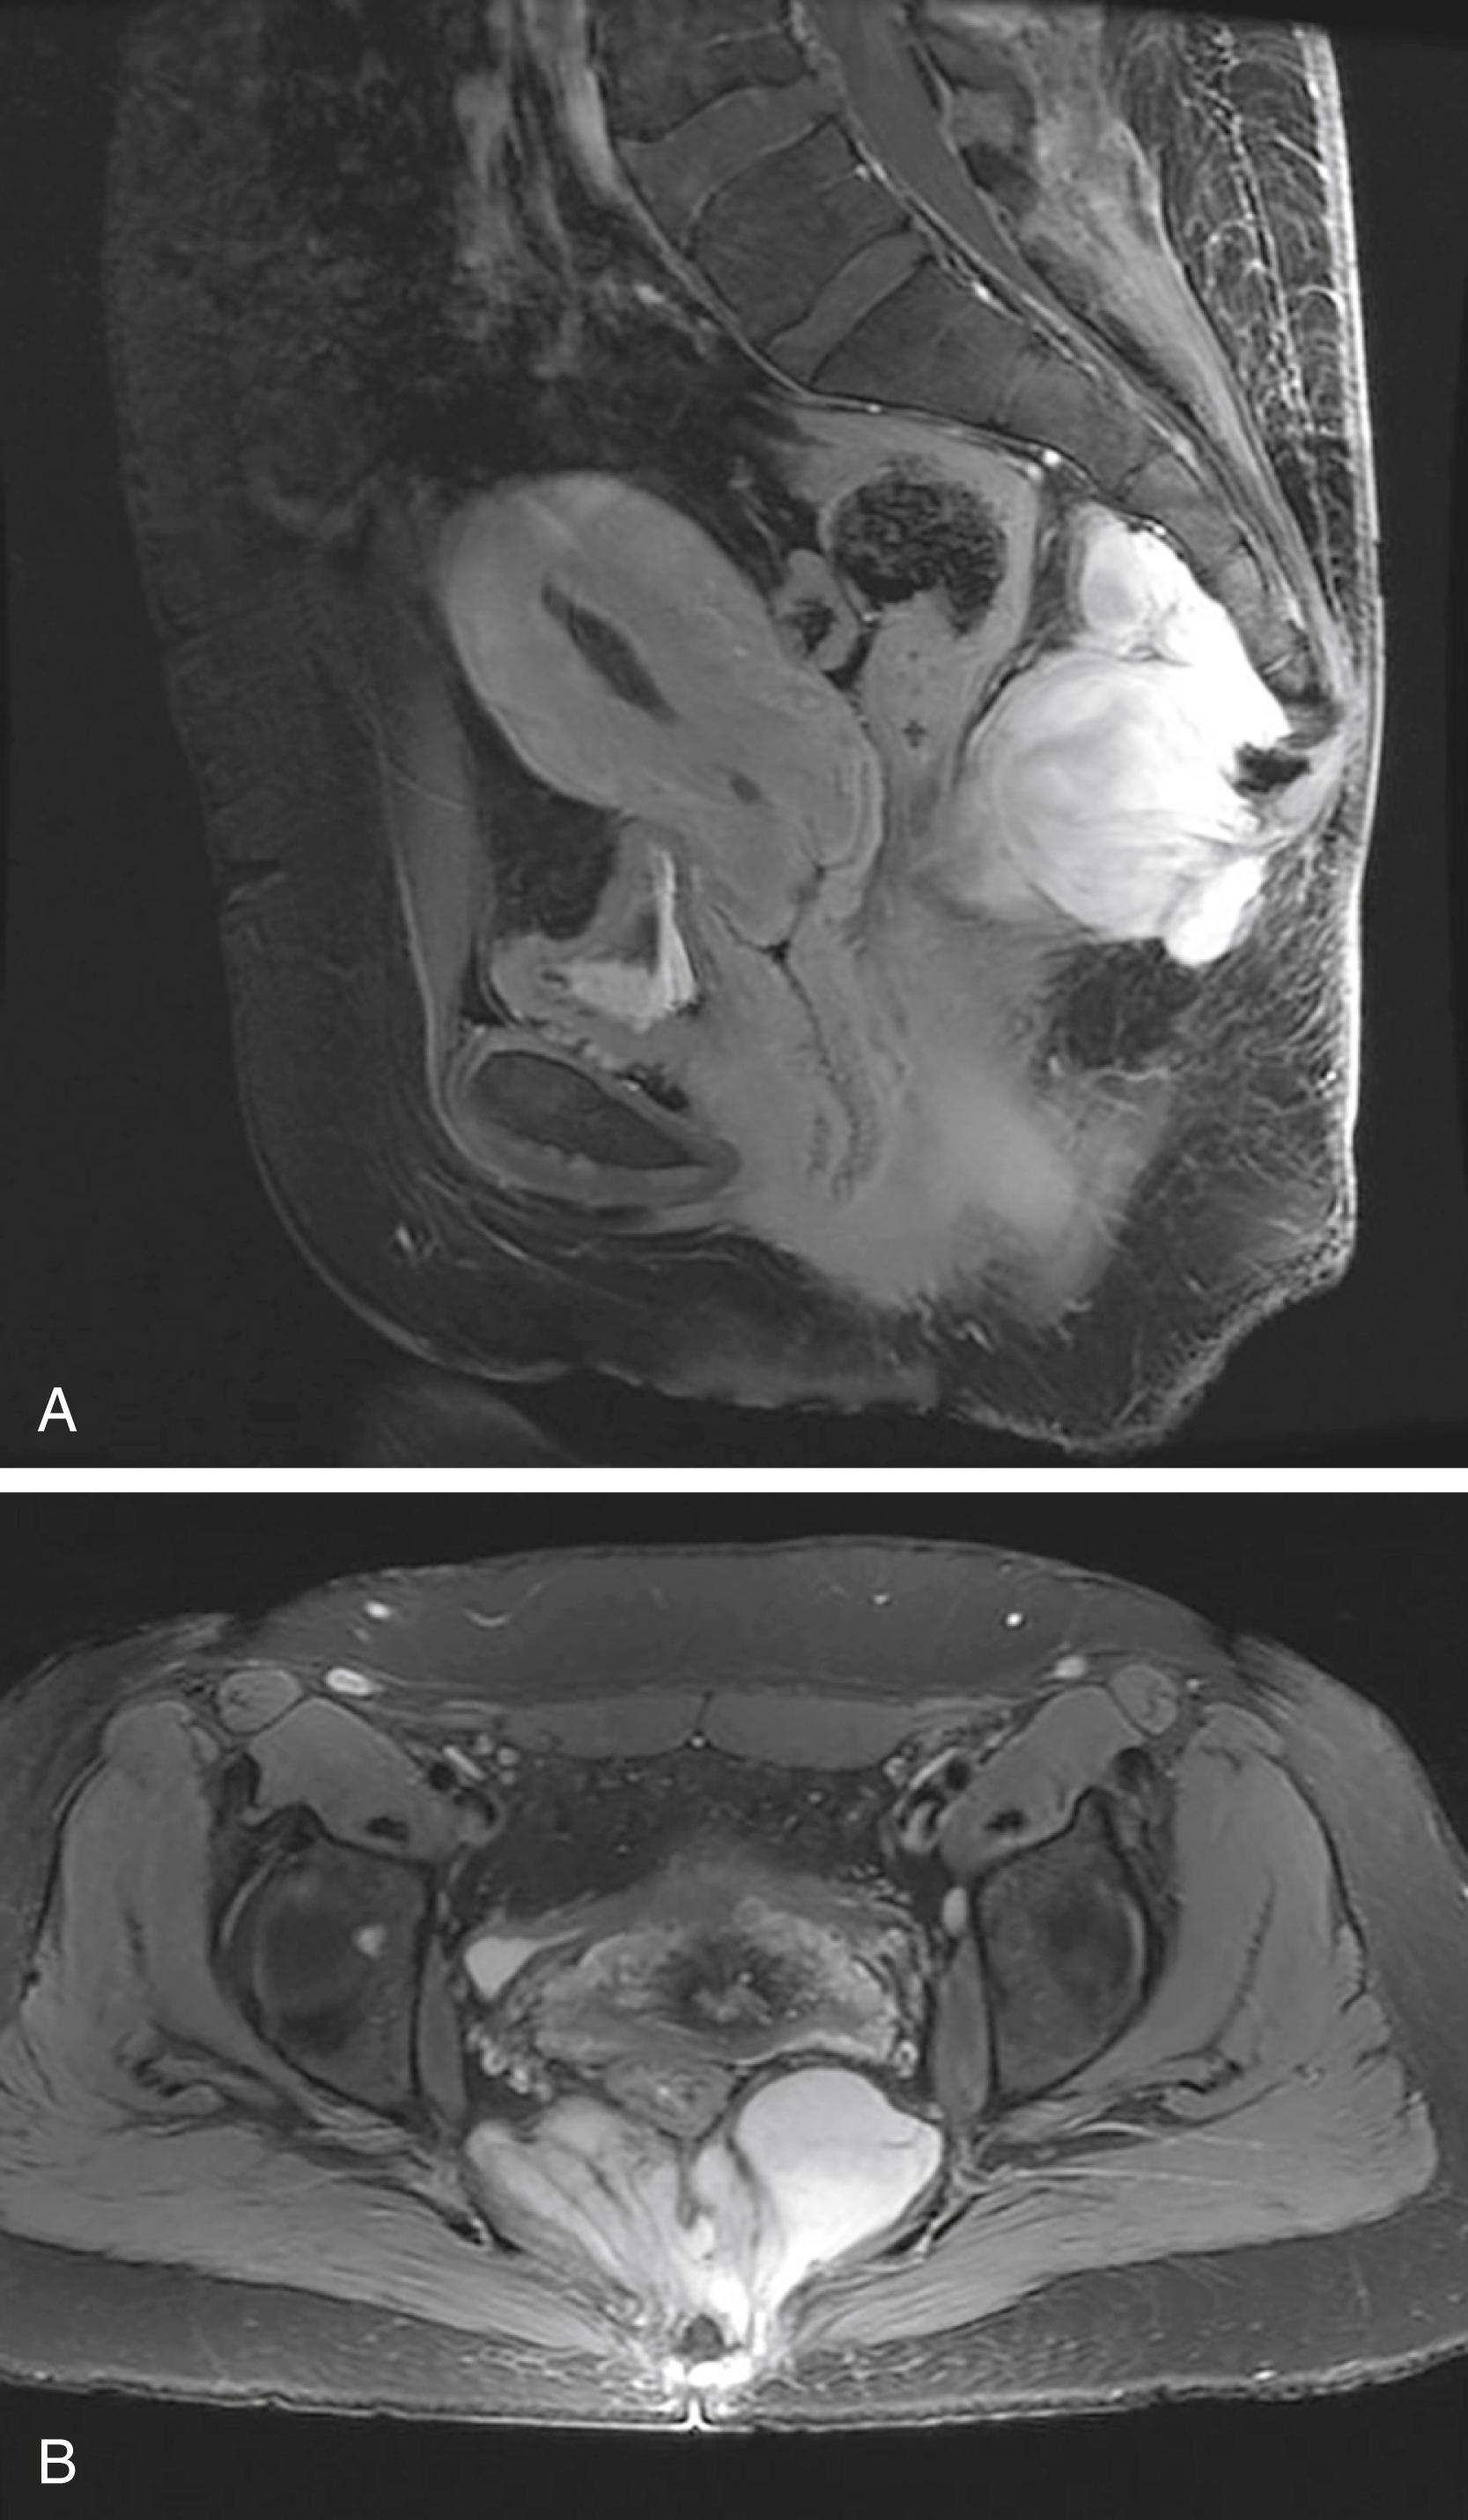 Fig. 158.11, A 42-year-old patient with a longstanding complaint of constipation. The patient was referred for multidisciplinary evaluation following detection of a presacral mass on computed tomography. Pelvic magnetic resonance imaging from ( A ) sagittal and ( B ) axial views showed a multilobulated enhancing cystic mass arising from the lower sacrum and coccyx that was diagnosed as a ganglioneuroma.